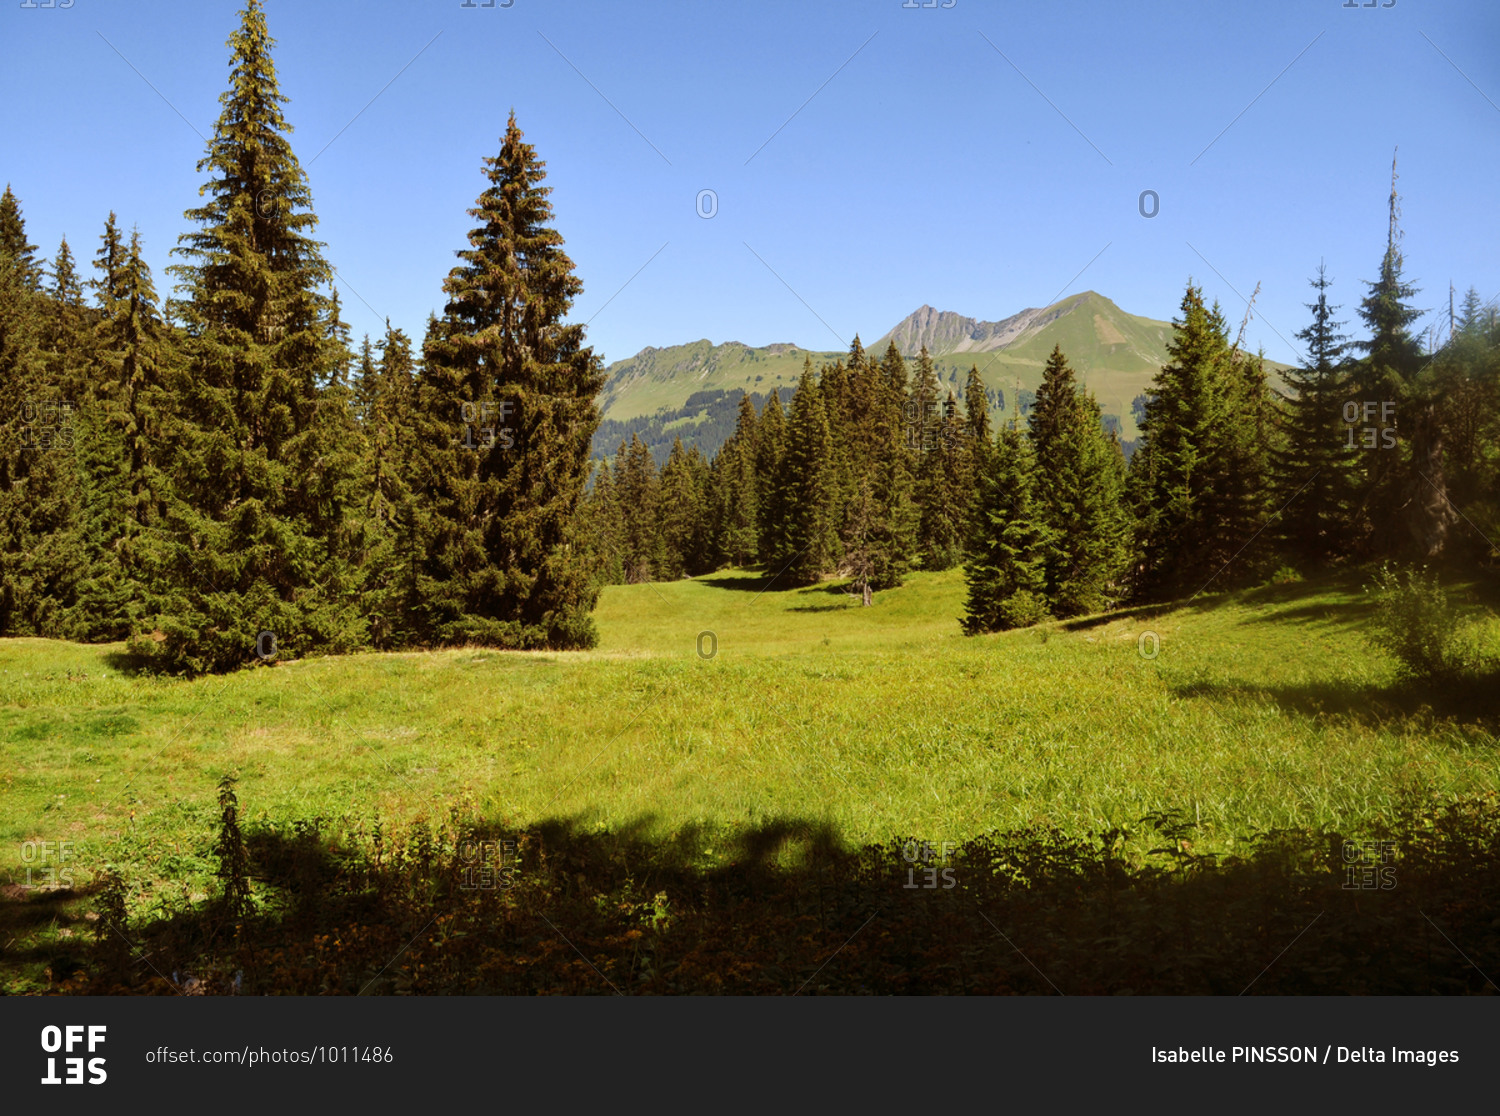 Switzerland, Bern canton, Hight-Simmental region, Pastures on Wispile, hiking to Lauenen valley and lake